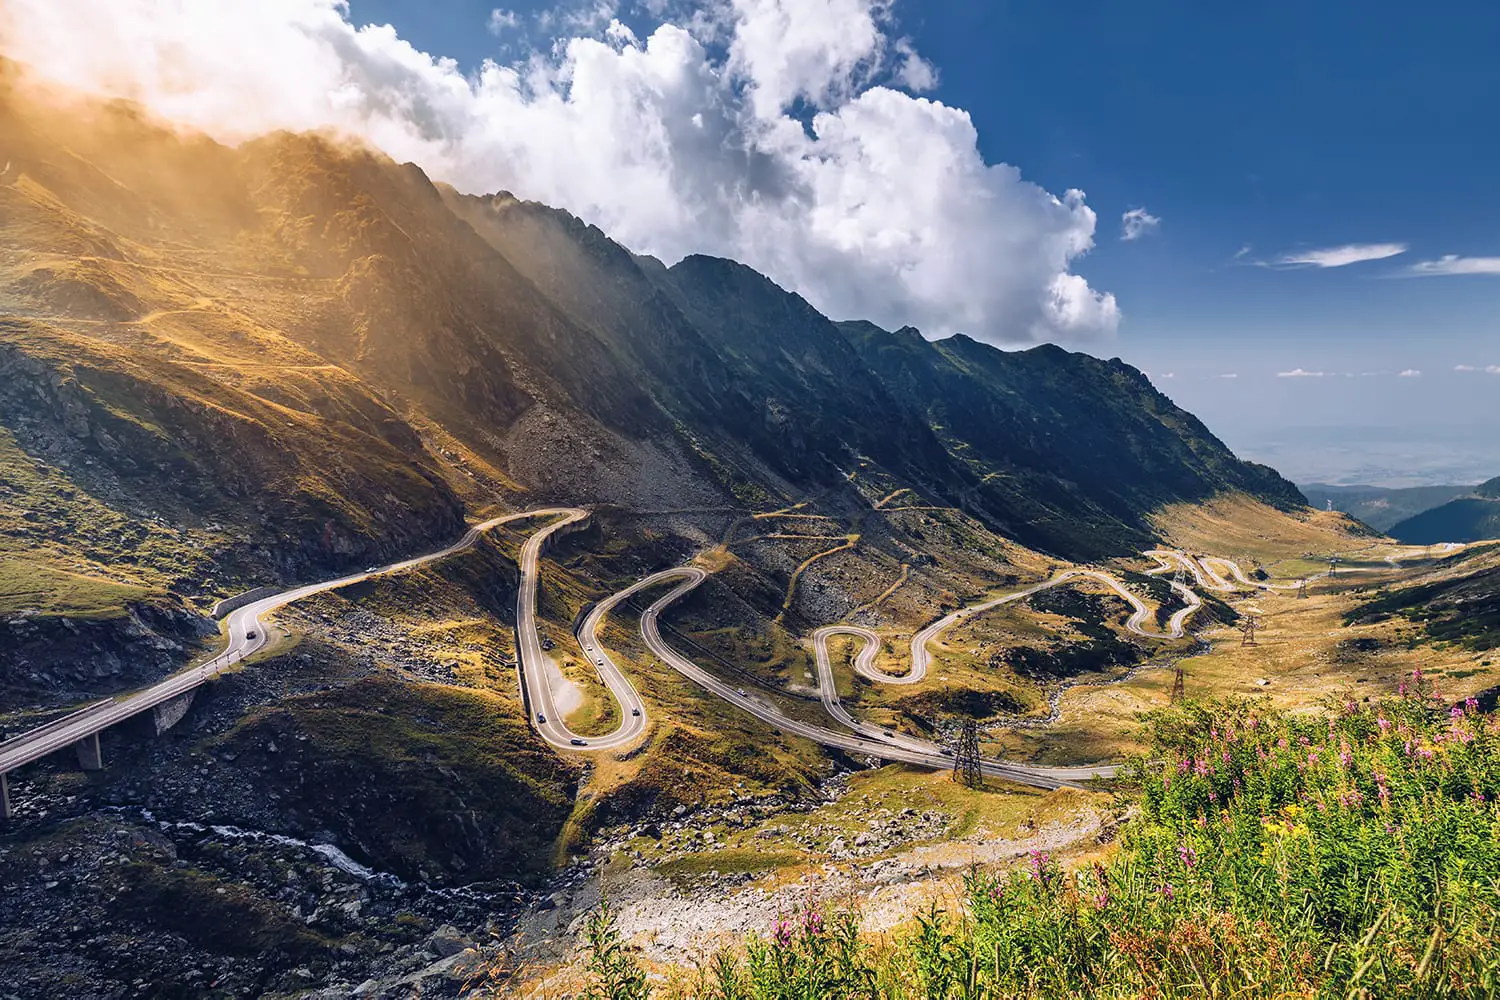 Transfagarasan pass in summer. Crossing Carpathian mountains in Romania, Transfagarasan is one of the most spectacular mountain roads in the world